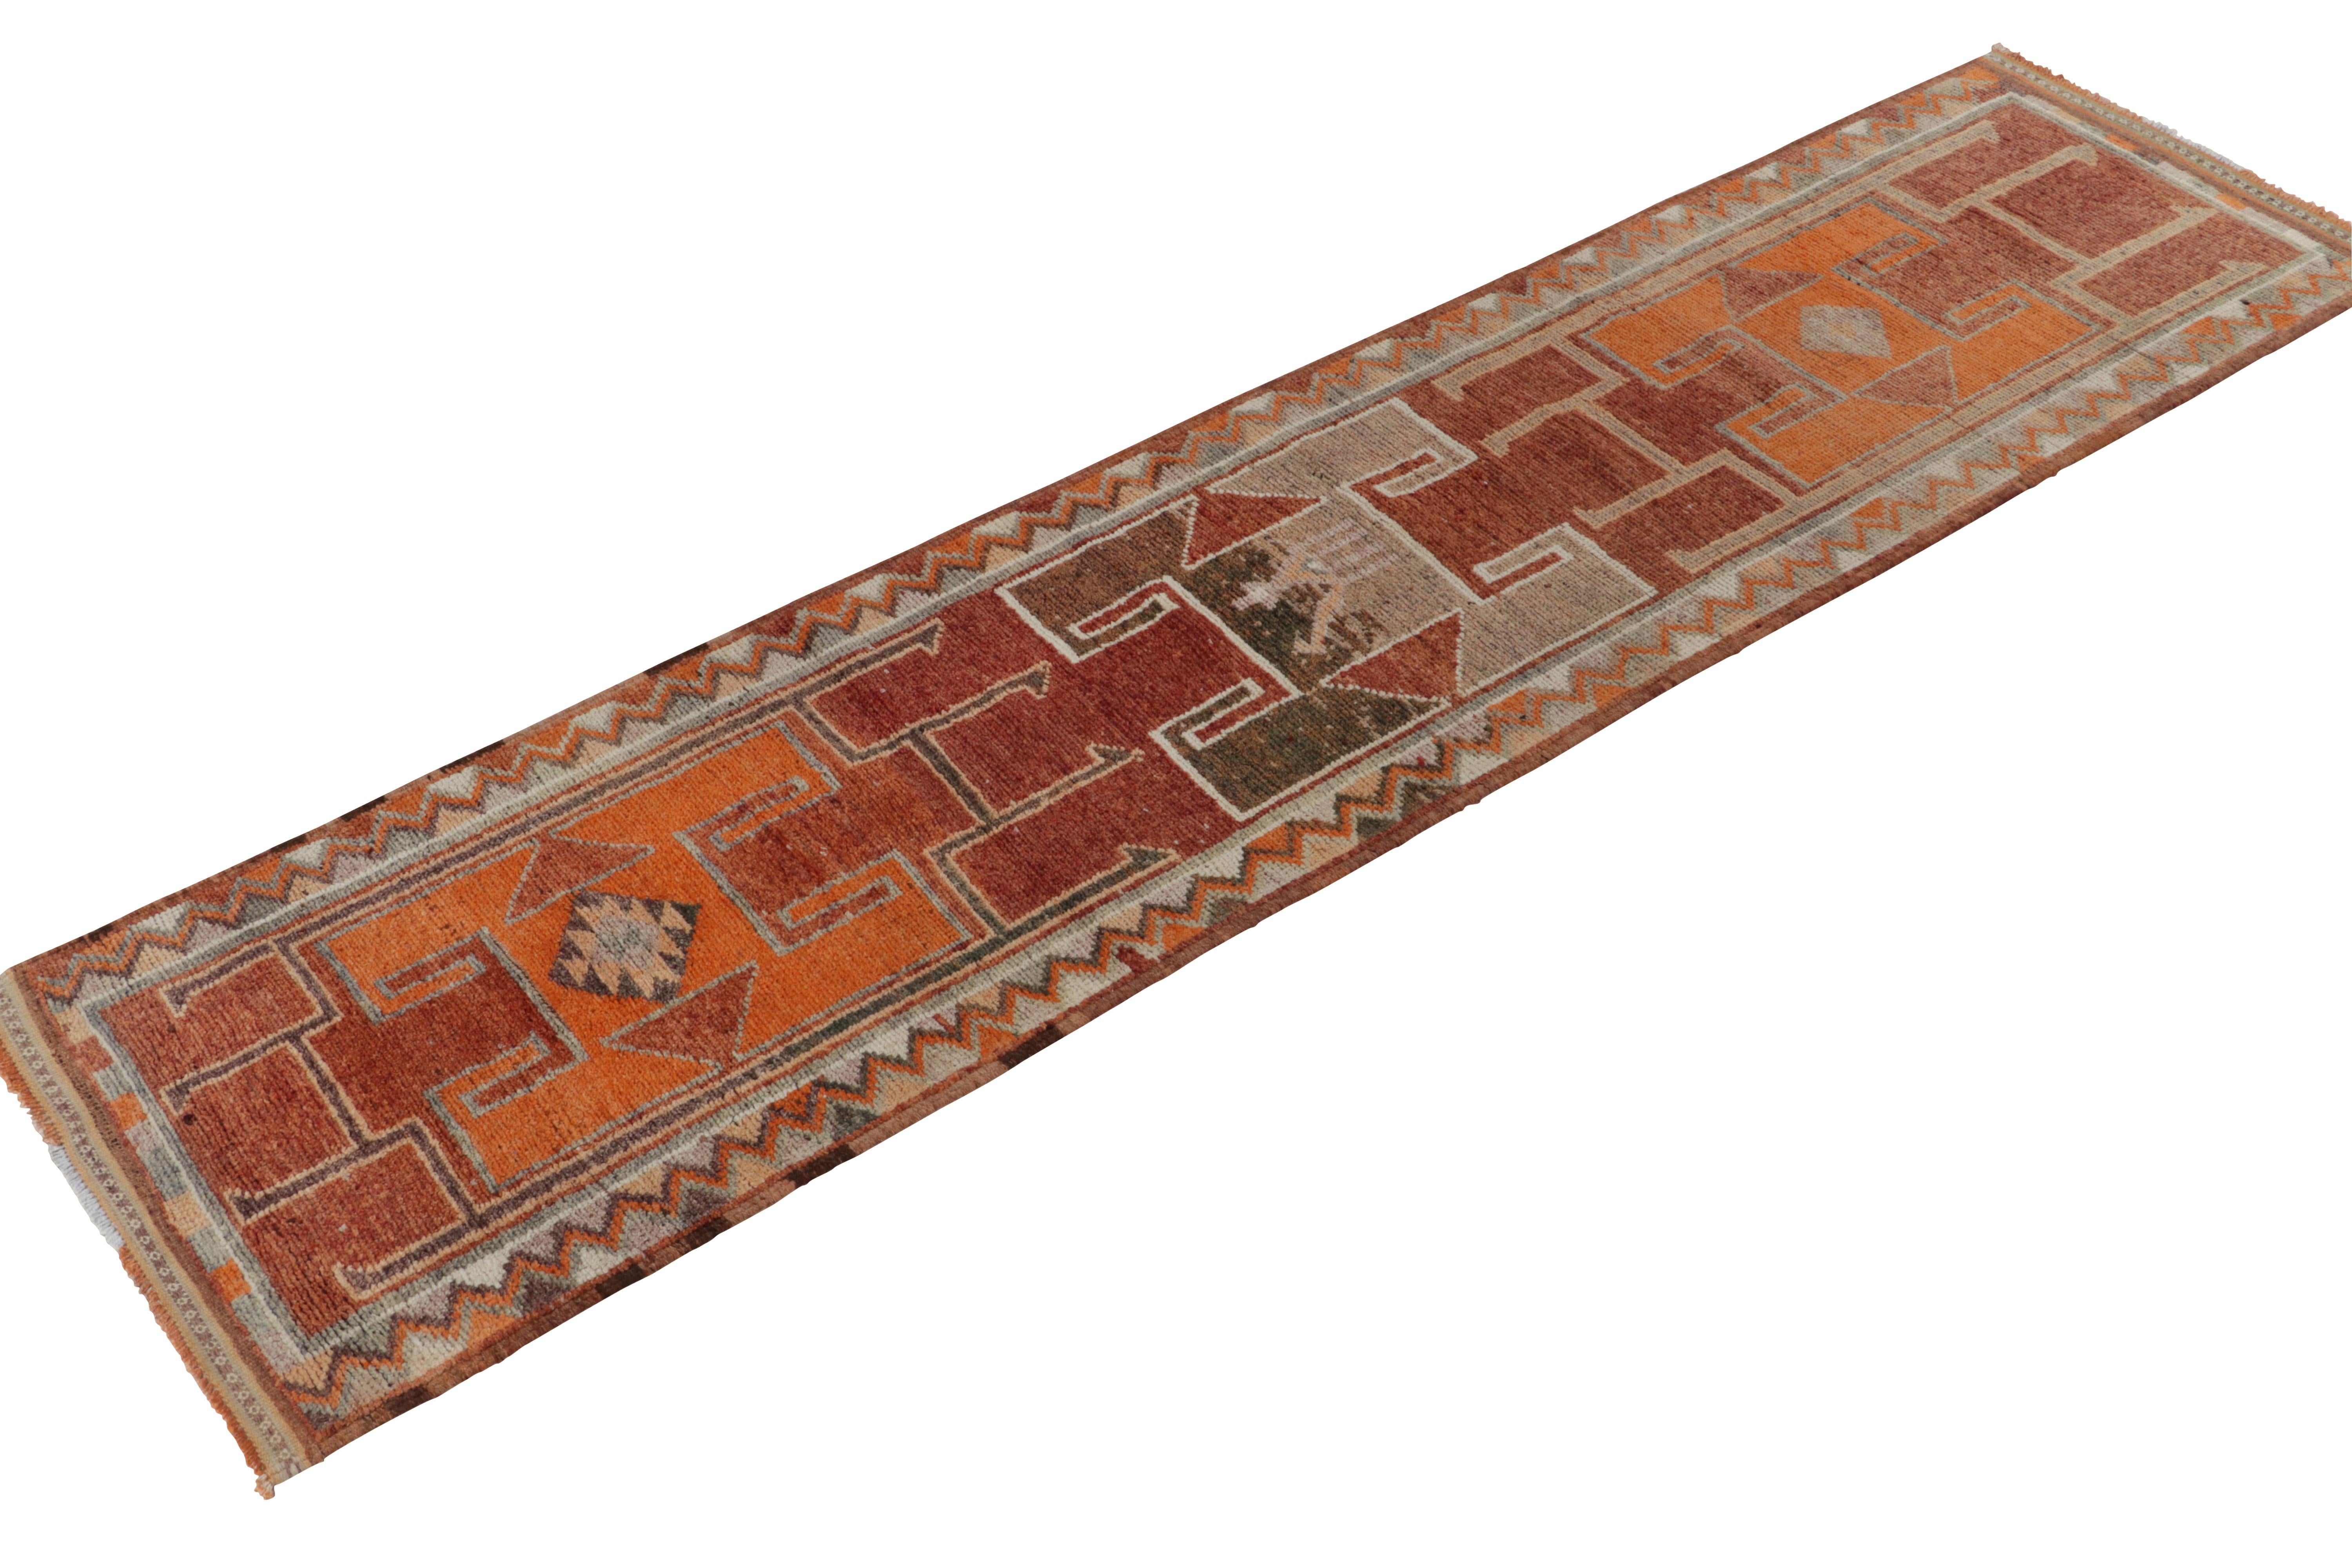 From R&K principal Josh Nazmiyal’s latest acquisitions, a 3x12 vintage tribal runner originating from Turkey circa 1950-1960.

On the Design: This all over geometric pattern features traditional motifs end to end in rich and warm red, orange &